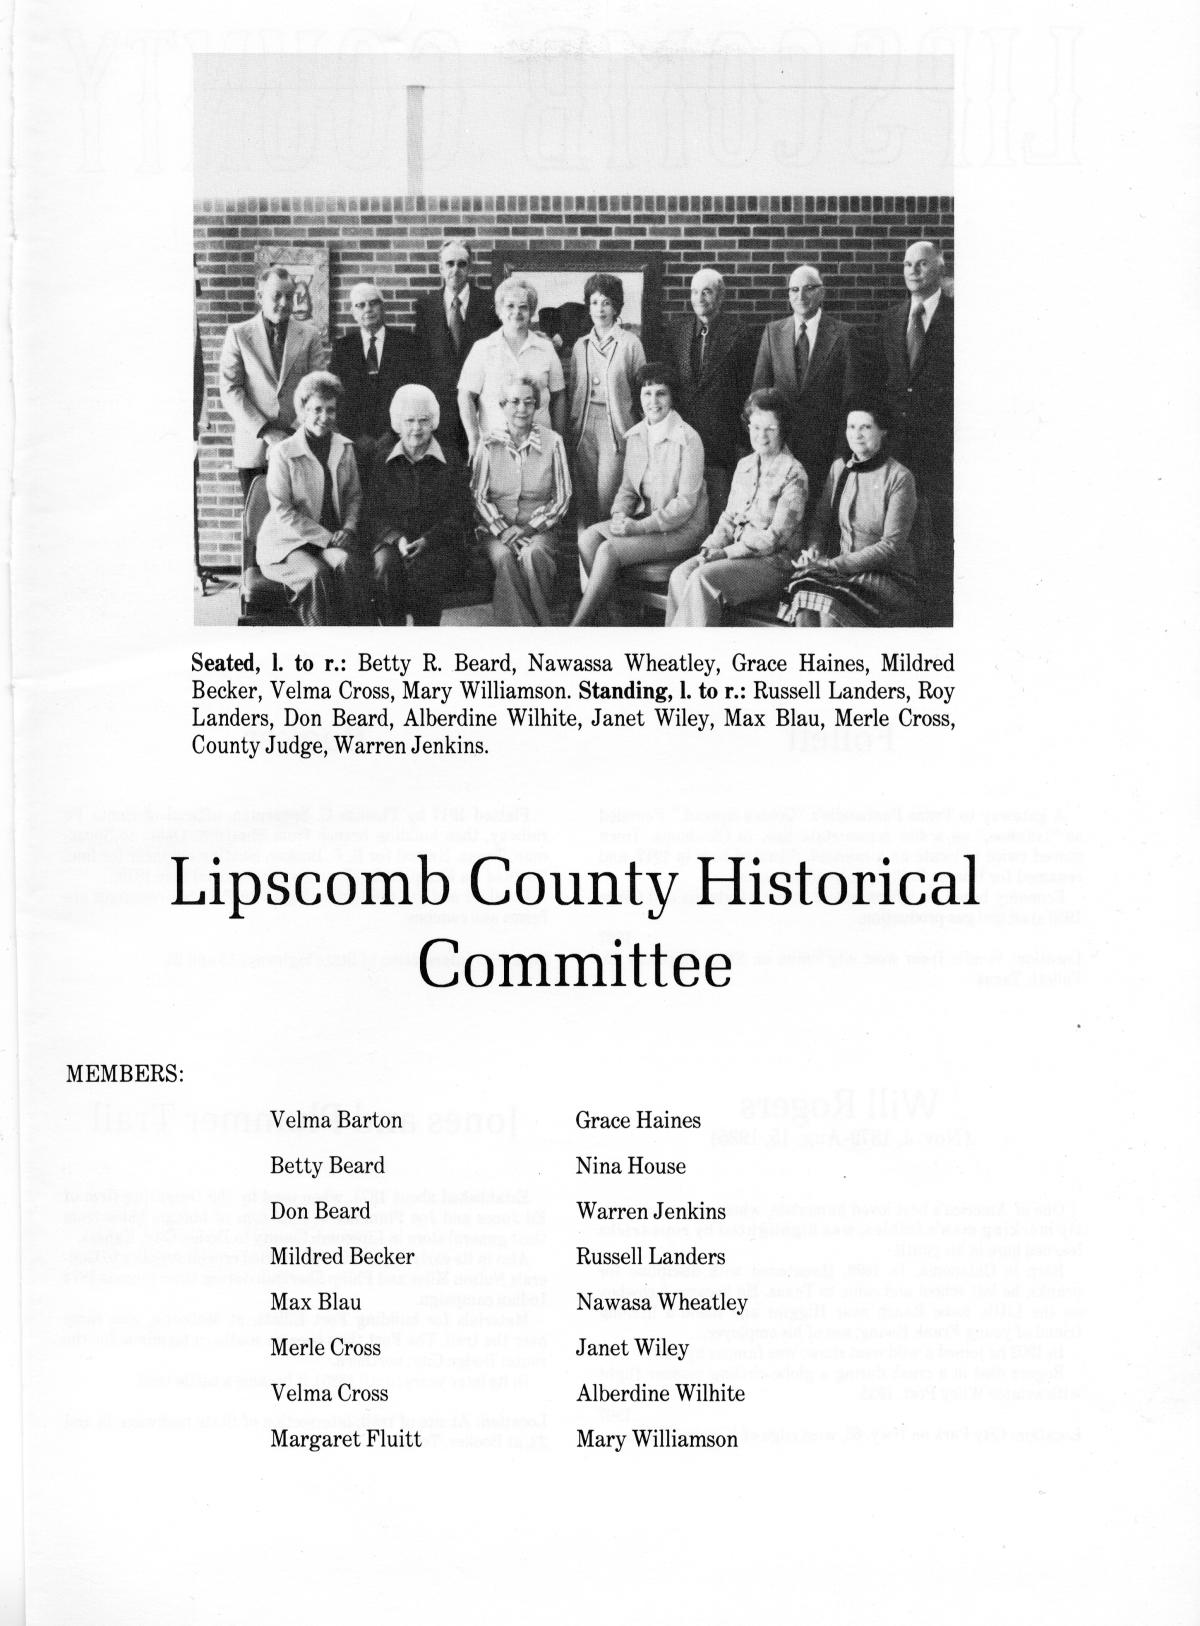 A History of Lipscomb County
                                                
                                                    3
                                                